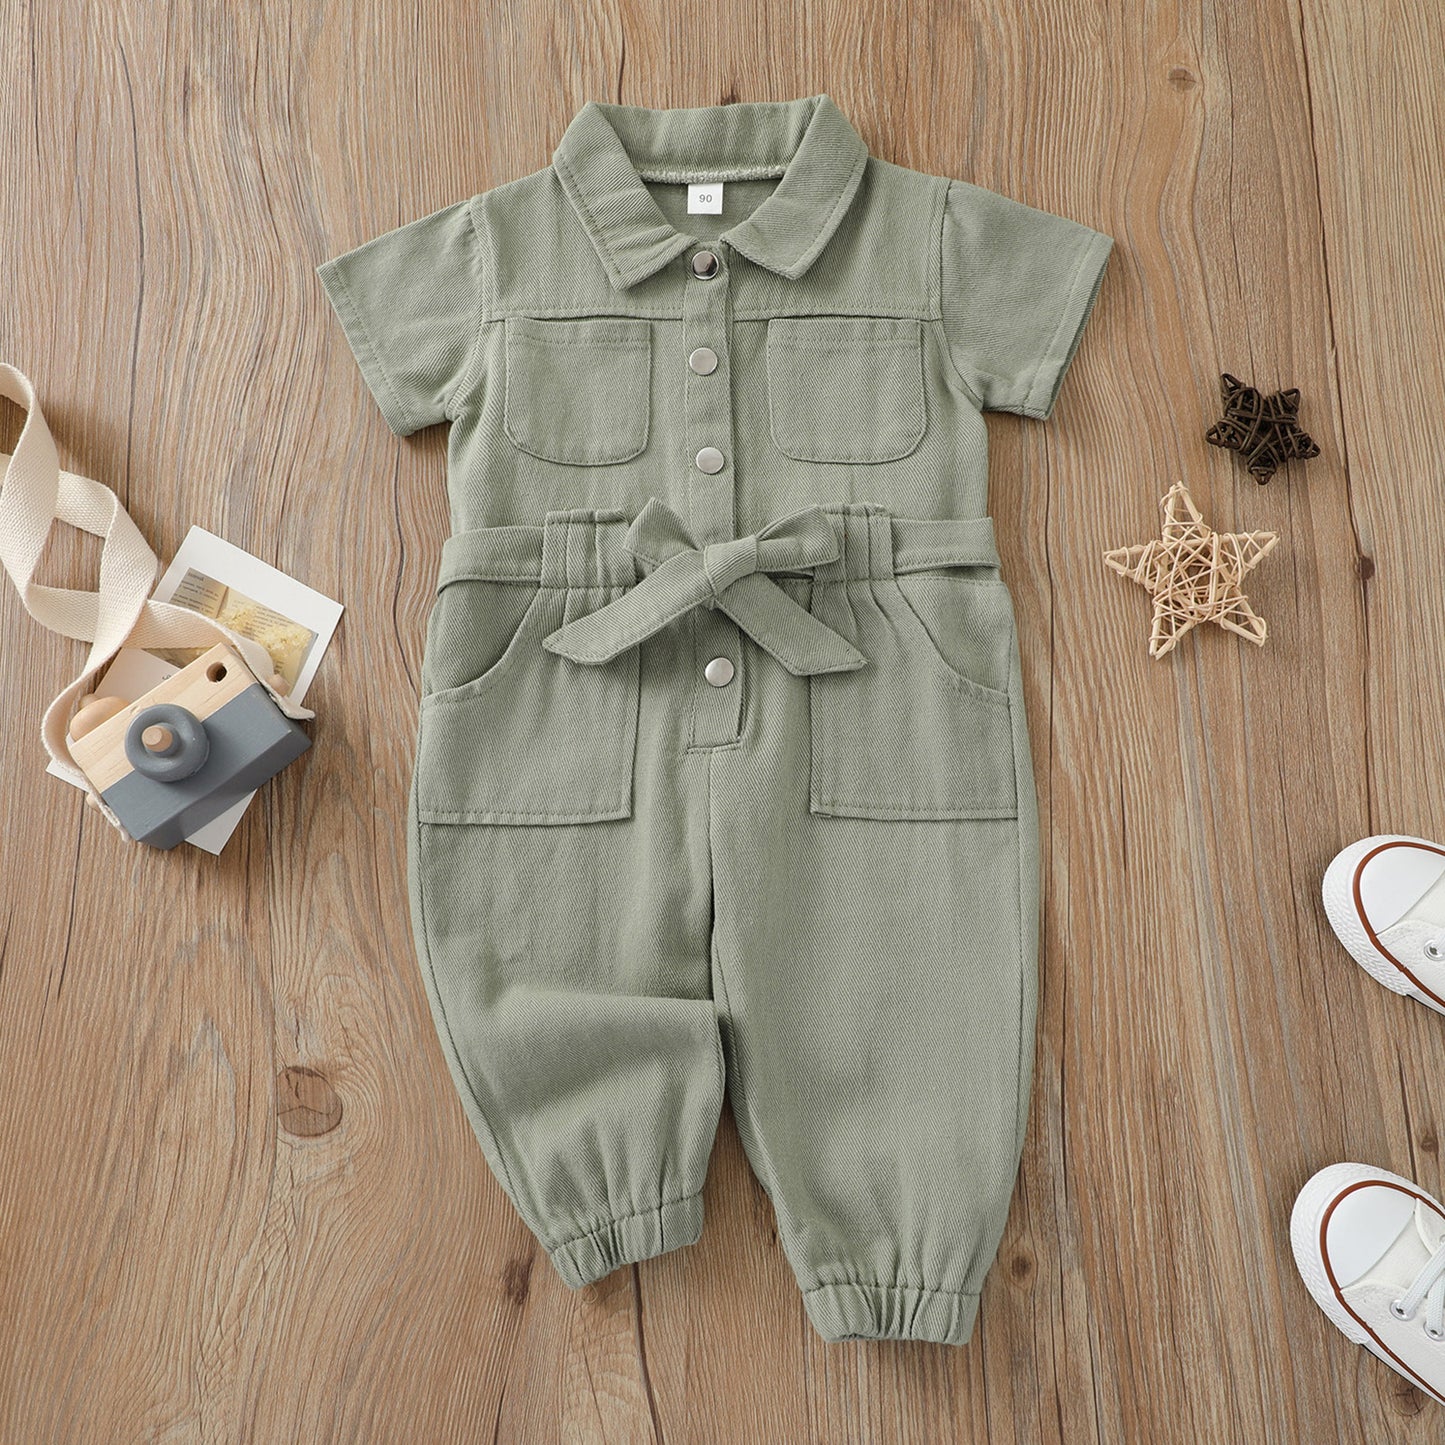 Girl's Denim Lapel One-piece Romper - different colors available